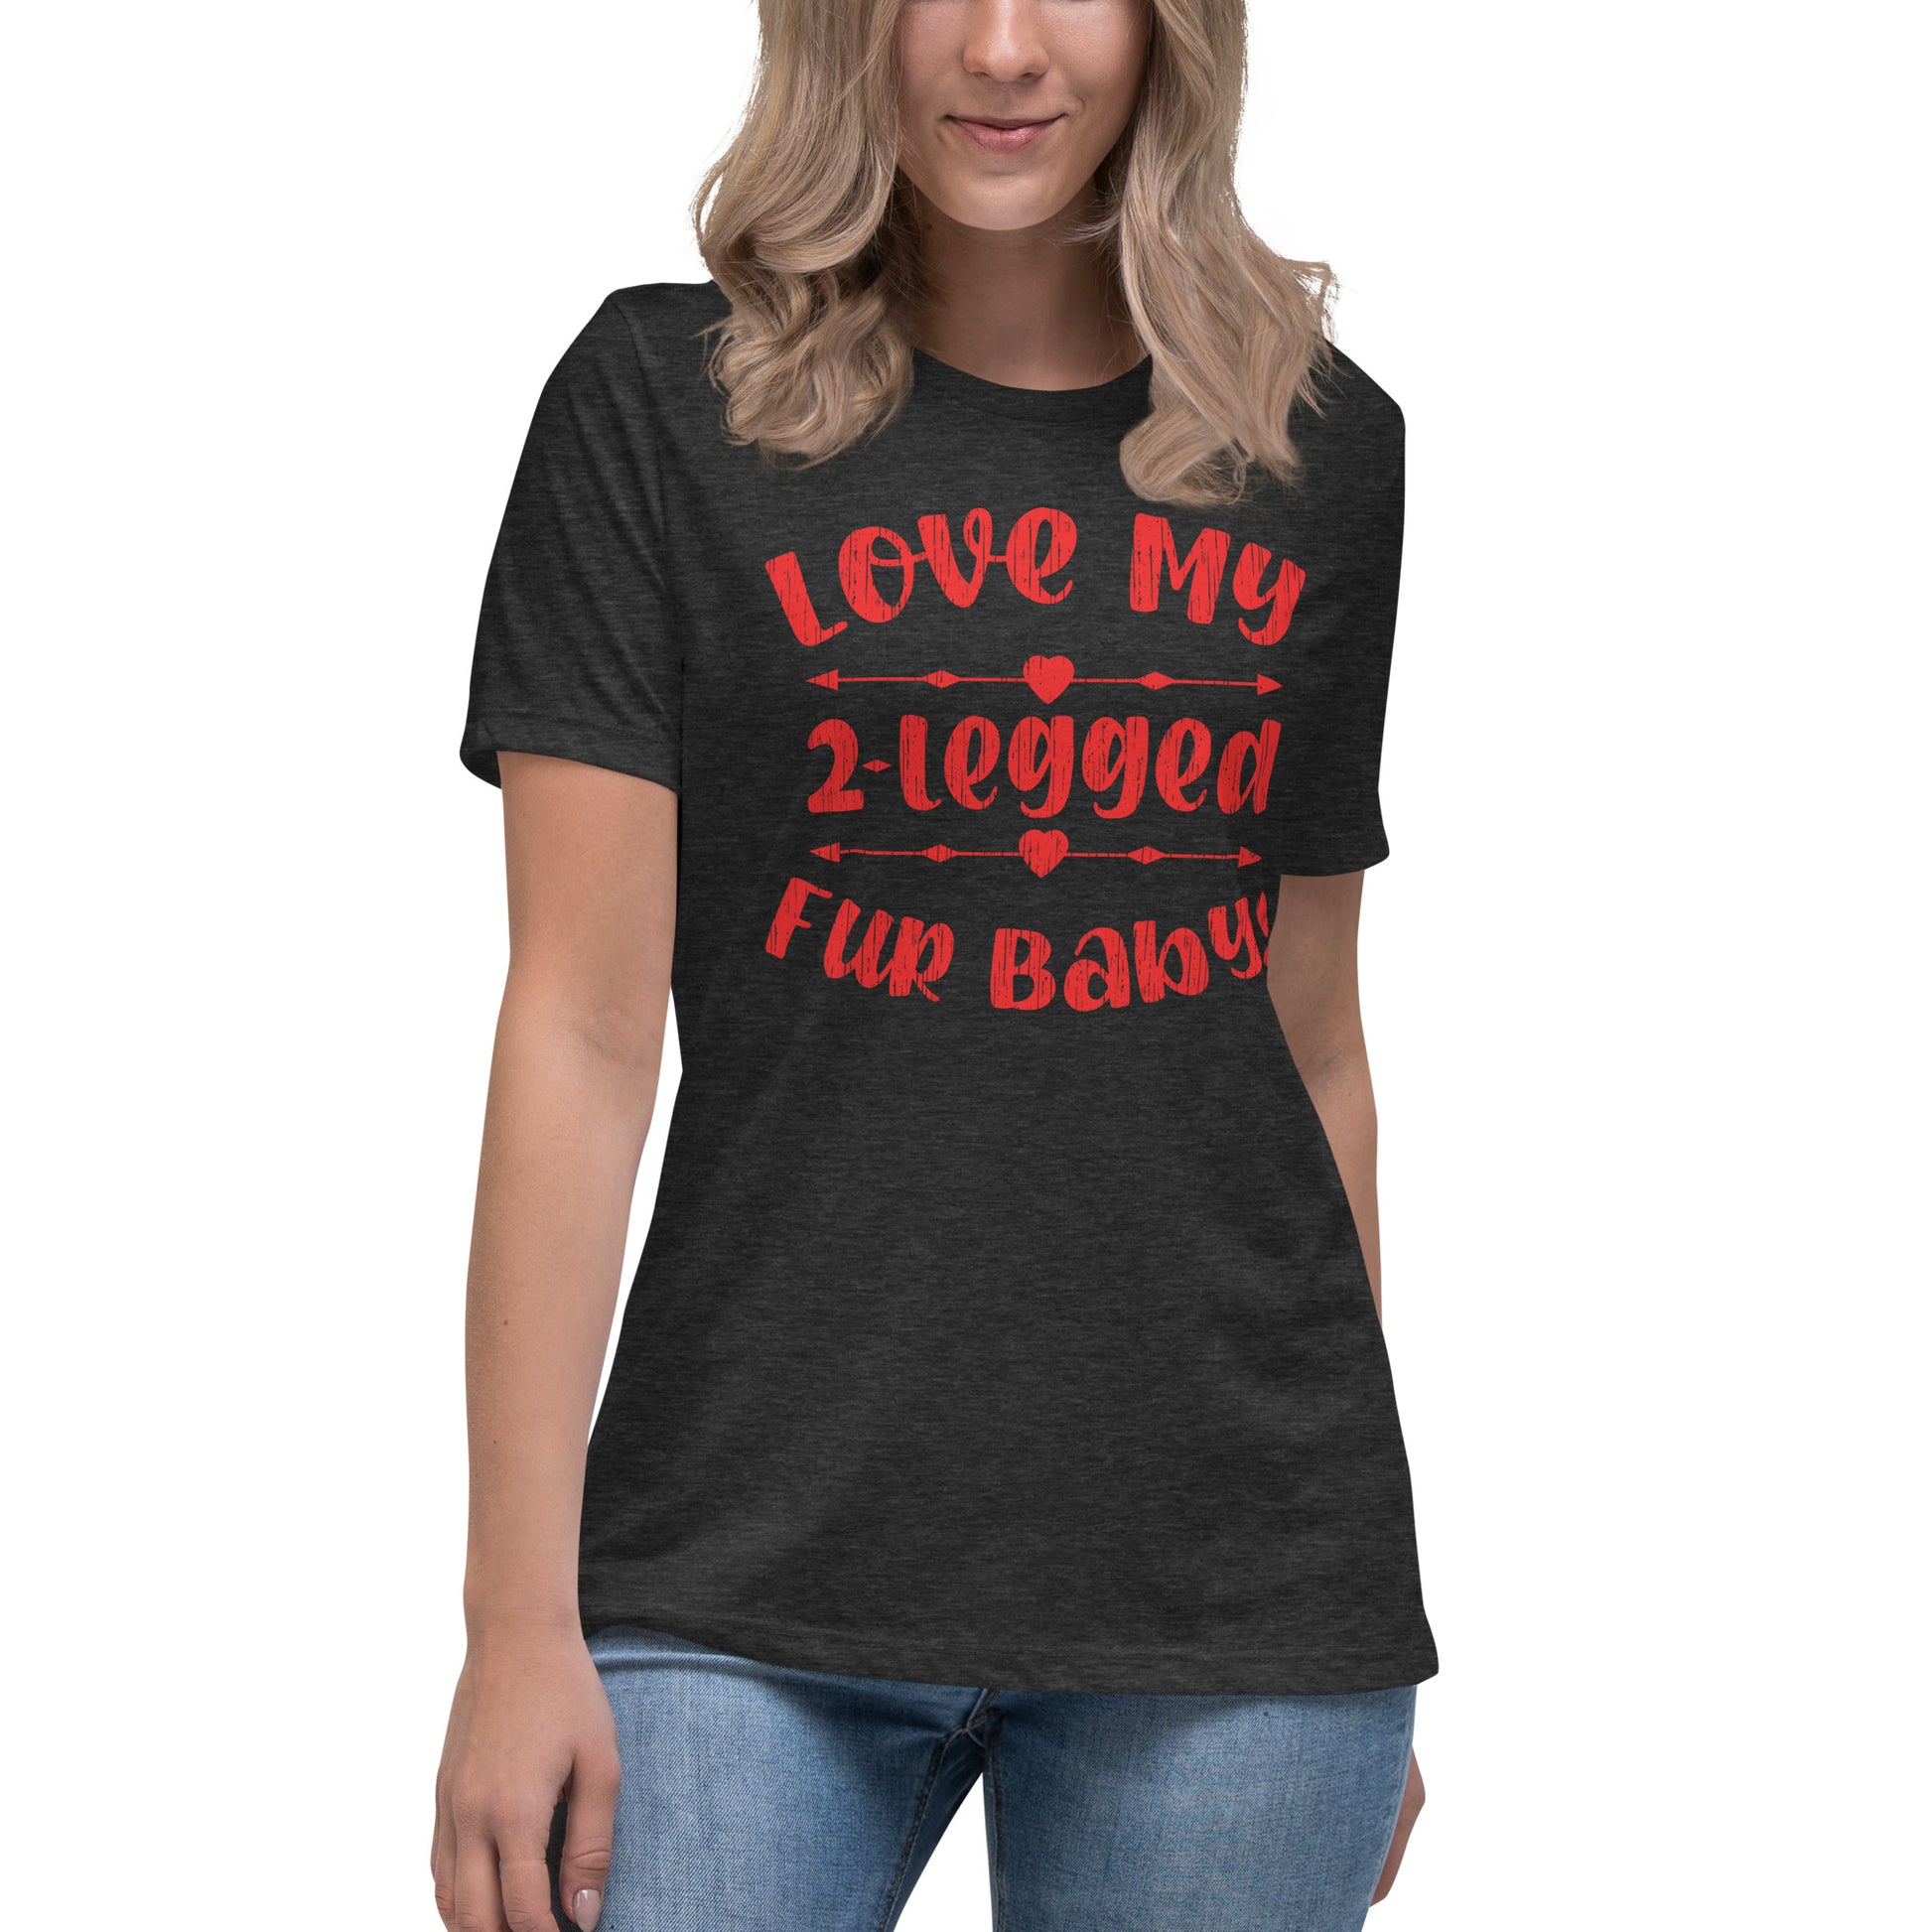 Love my 2-legged fur baby women’s relaxed fit t-shirts by Dog Artistry